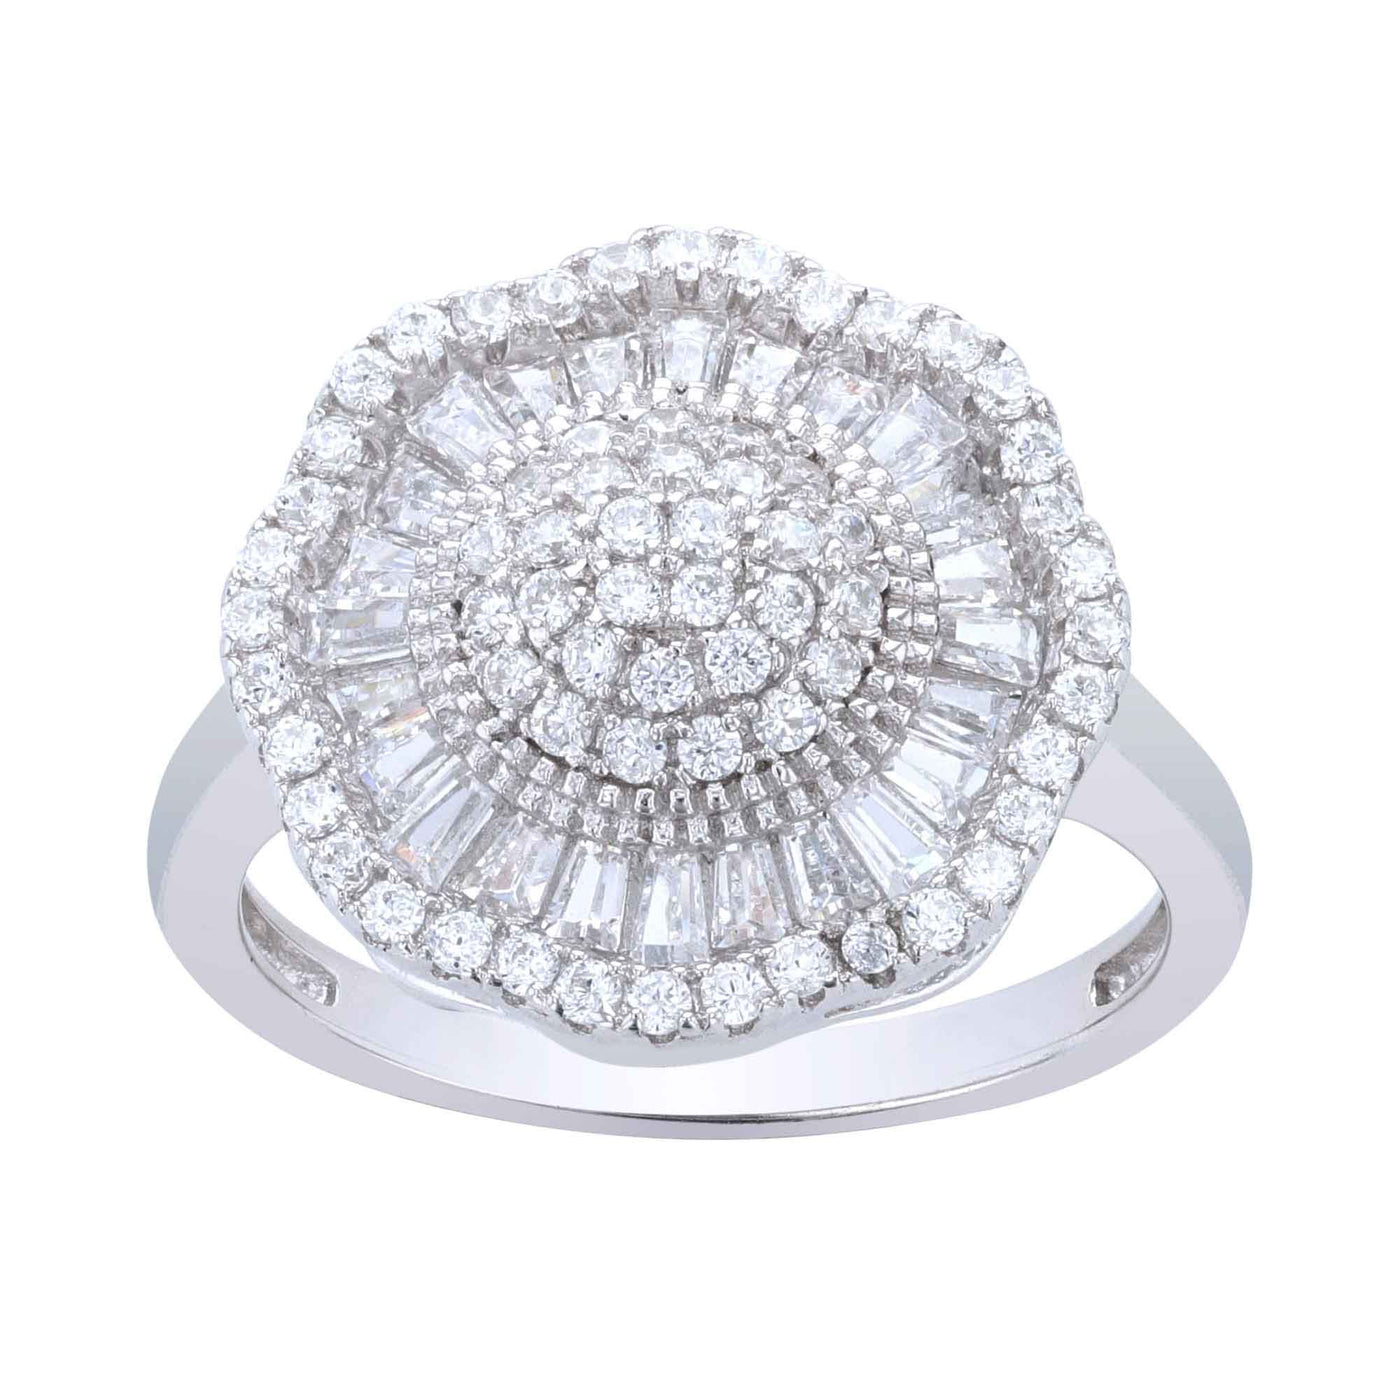 Rebecca Sloane Rhodium Plated Silver Ring with Octogonal CZ